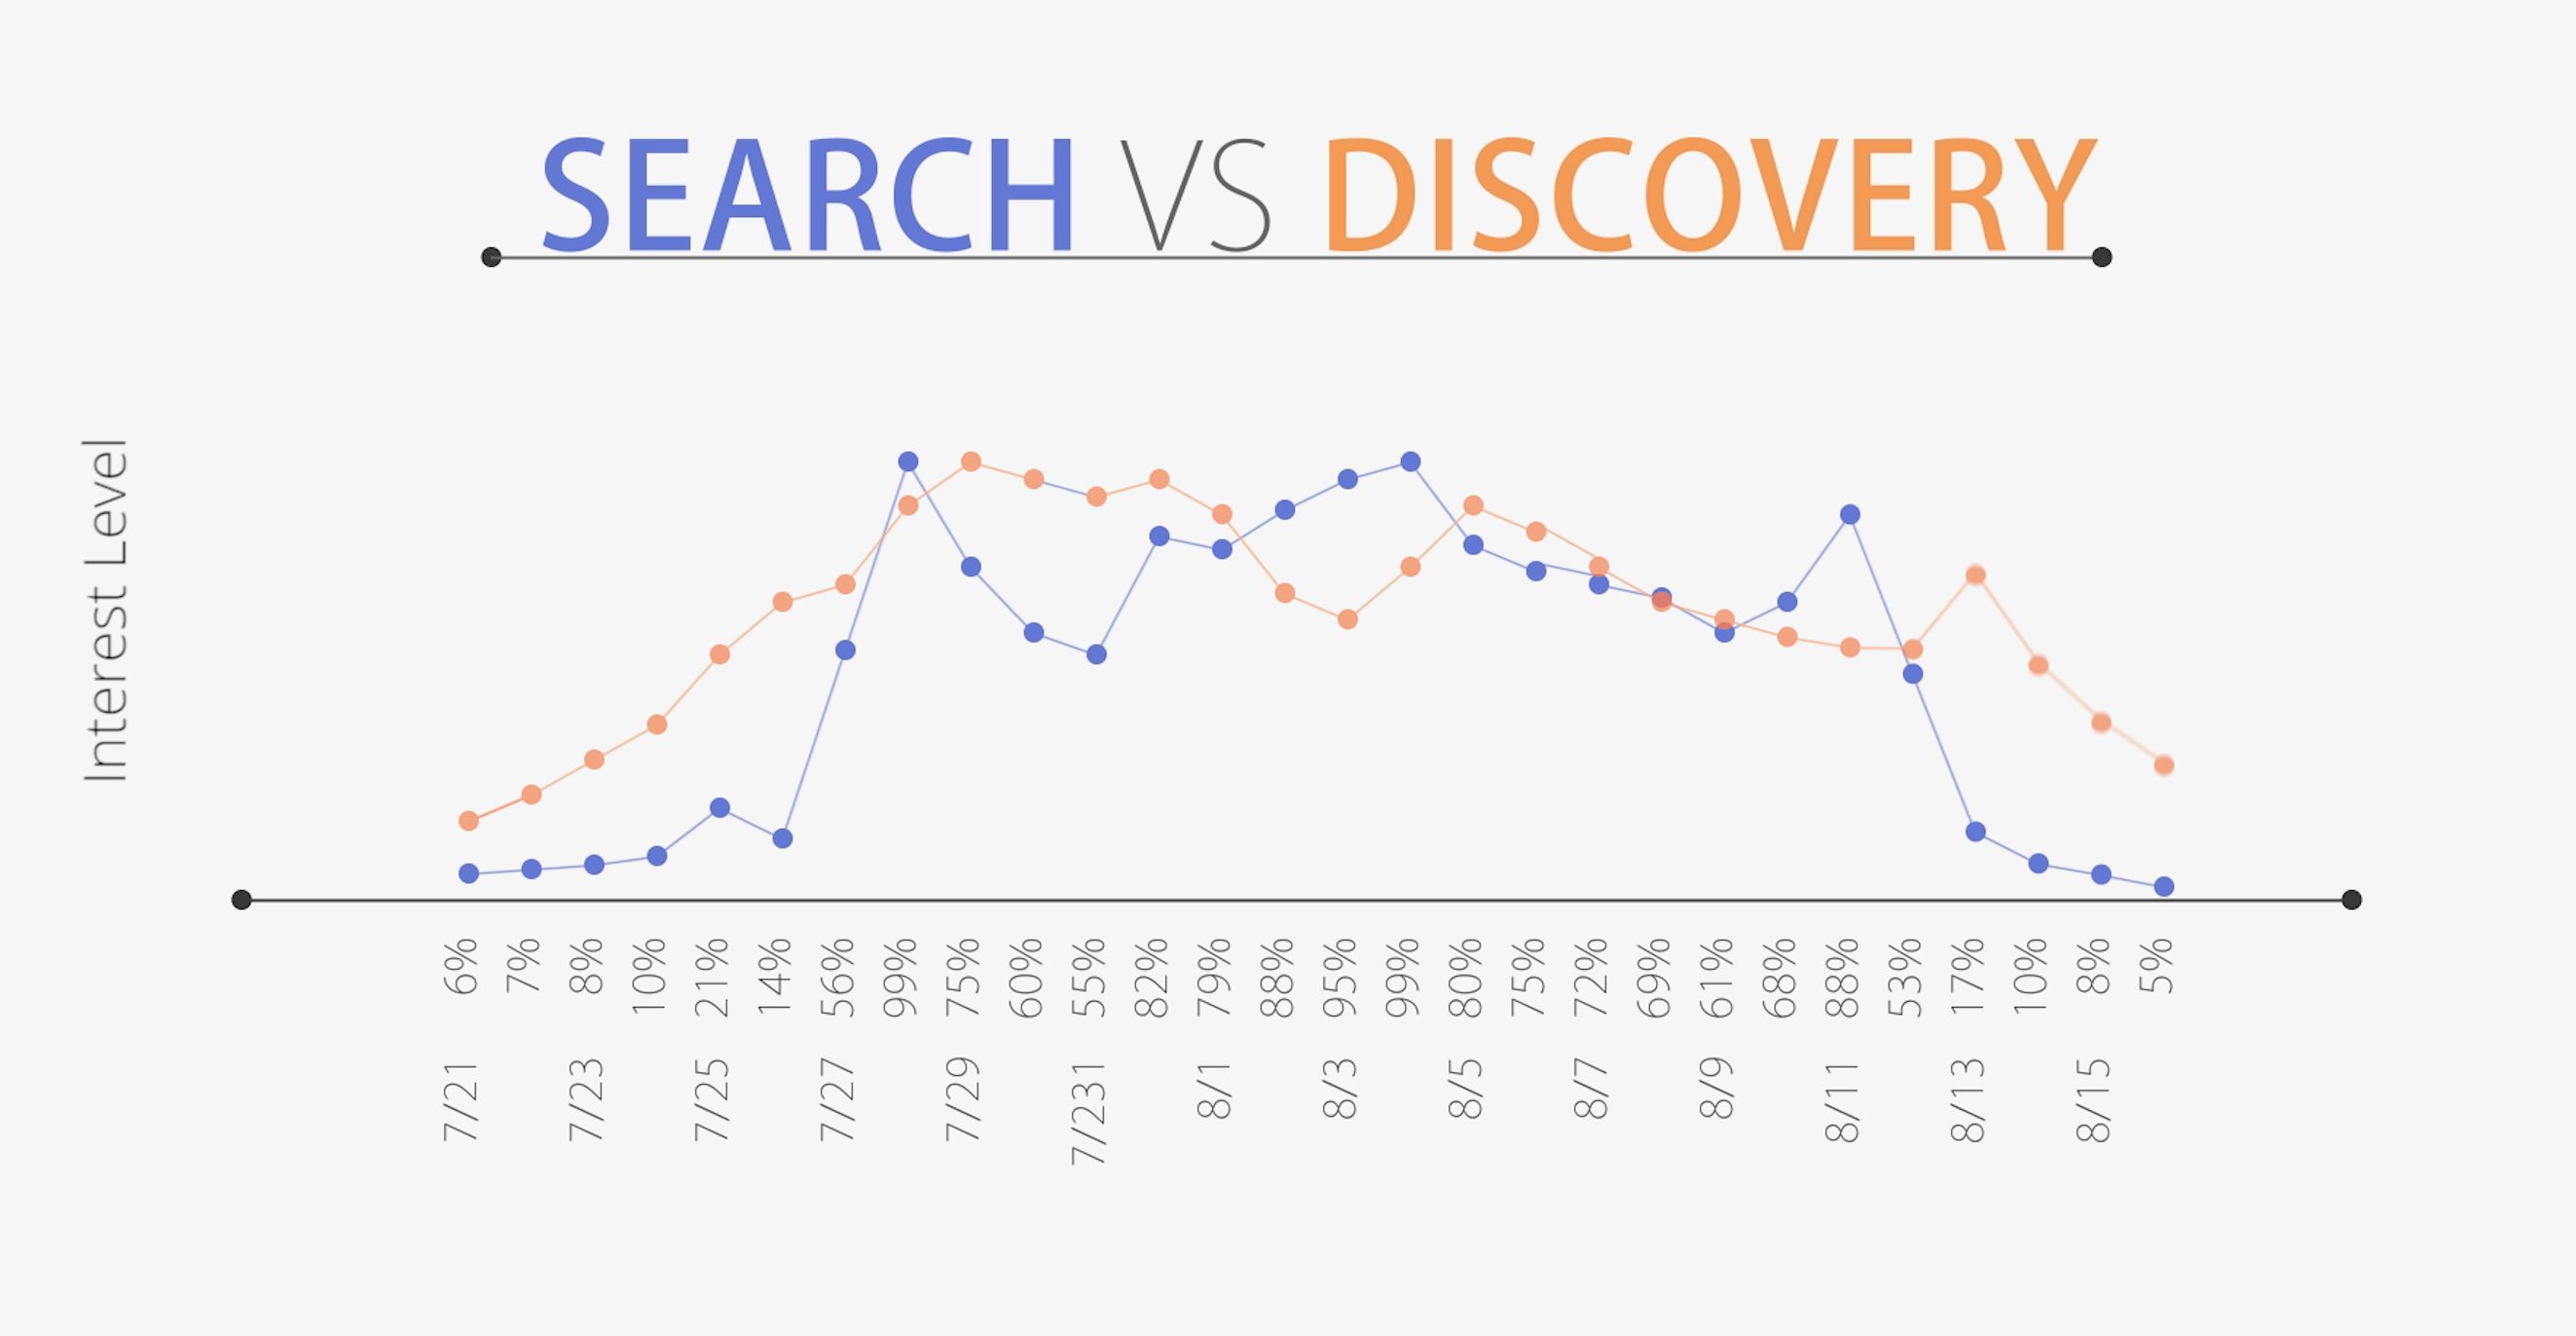 Search vs Discovery - Outbrain vs Google Trends data